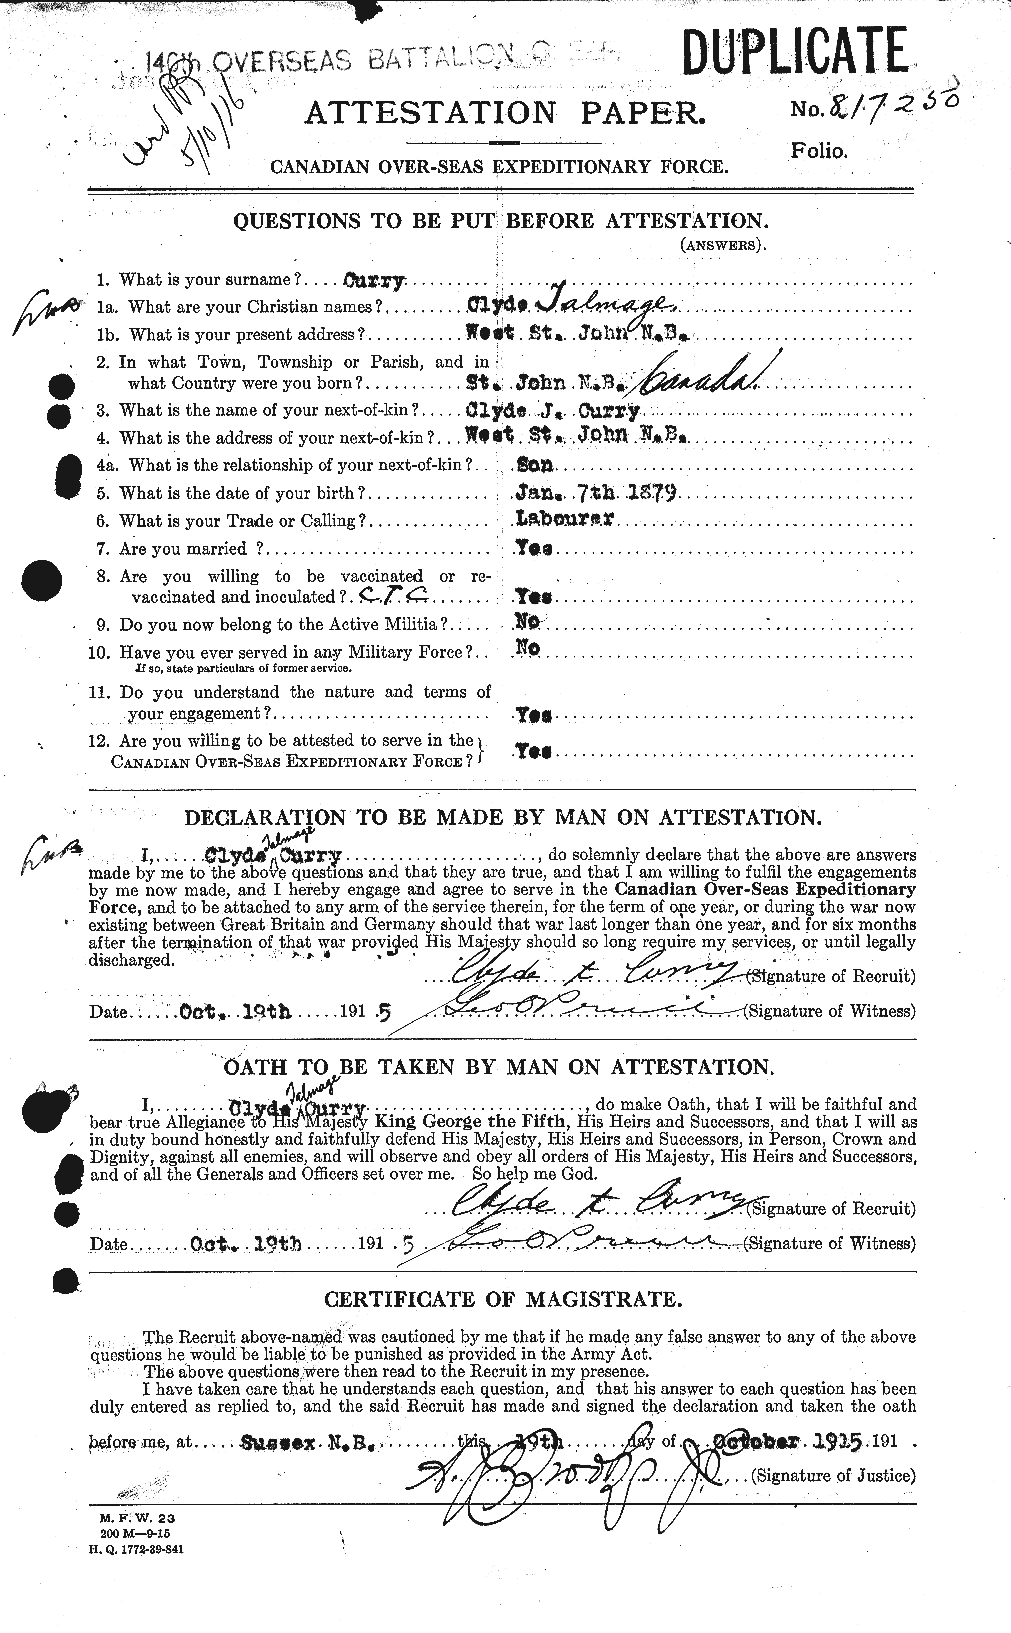 Personnel Records of the First World War - CEF 071211a